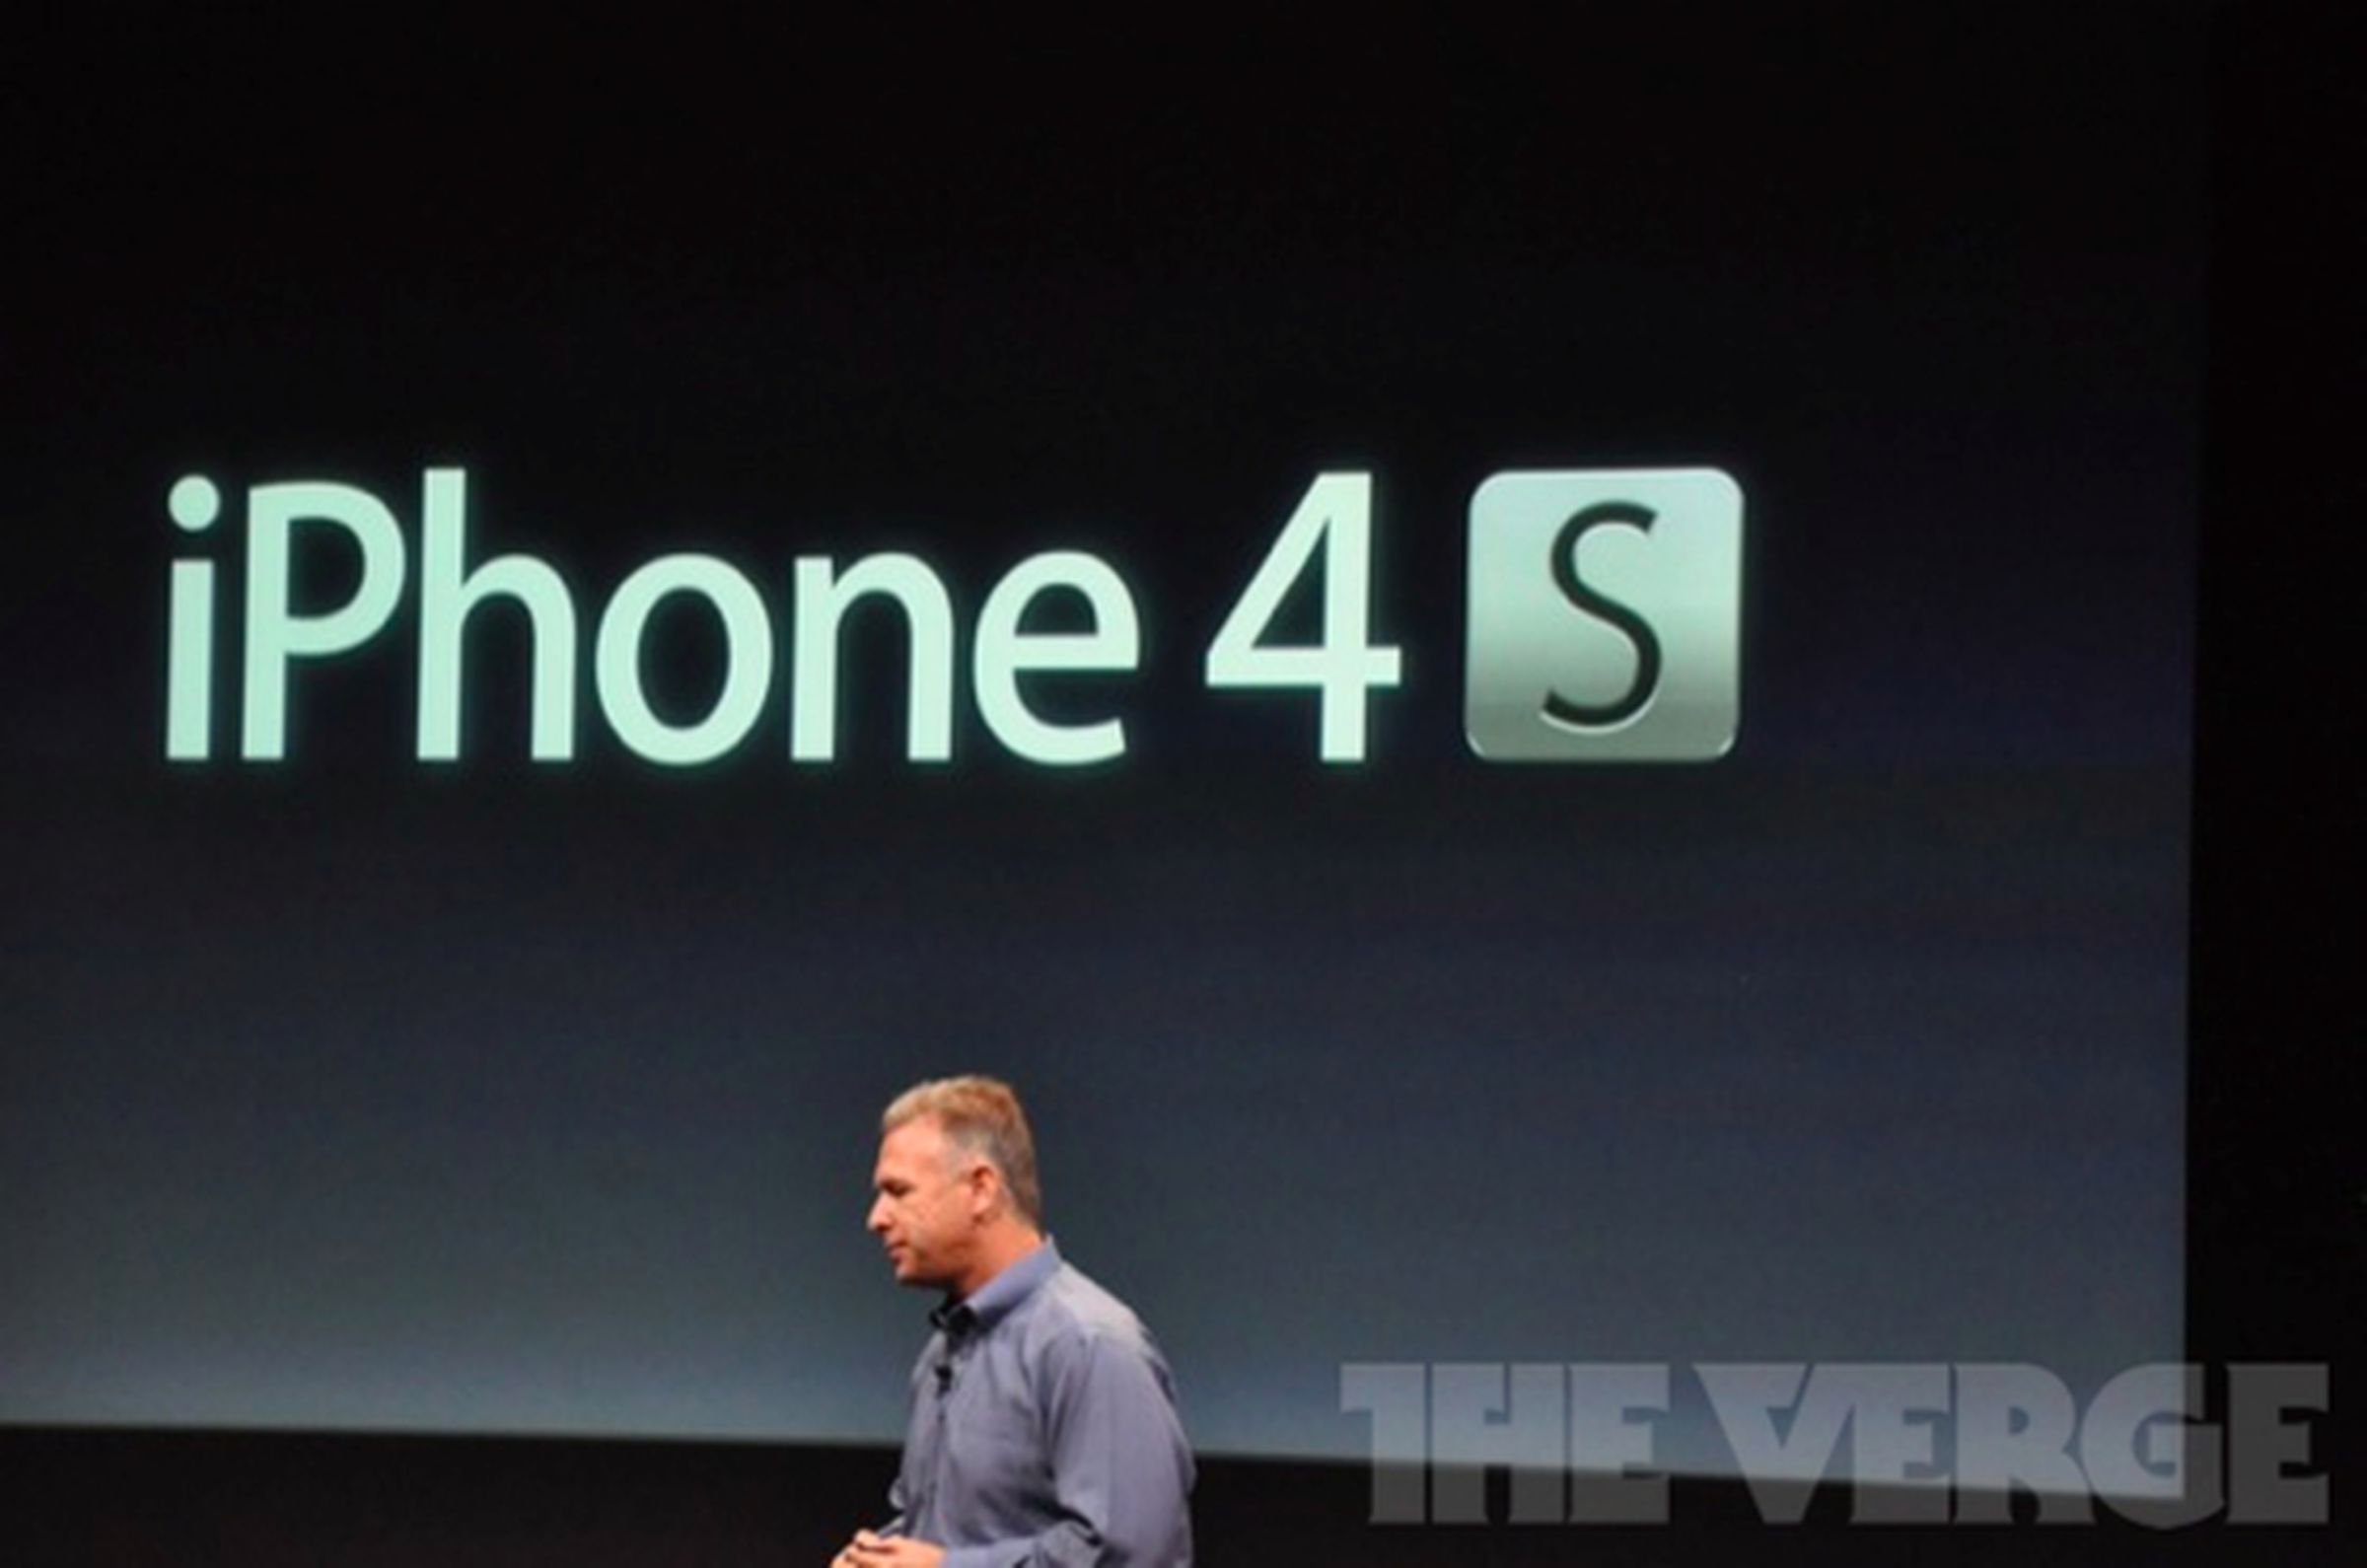 iPhone 4S for Sprint announced